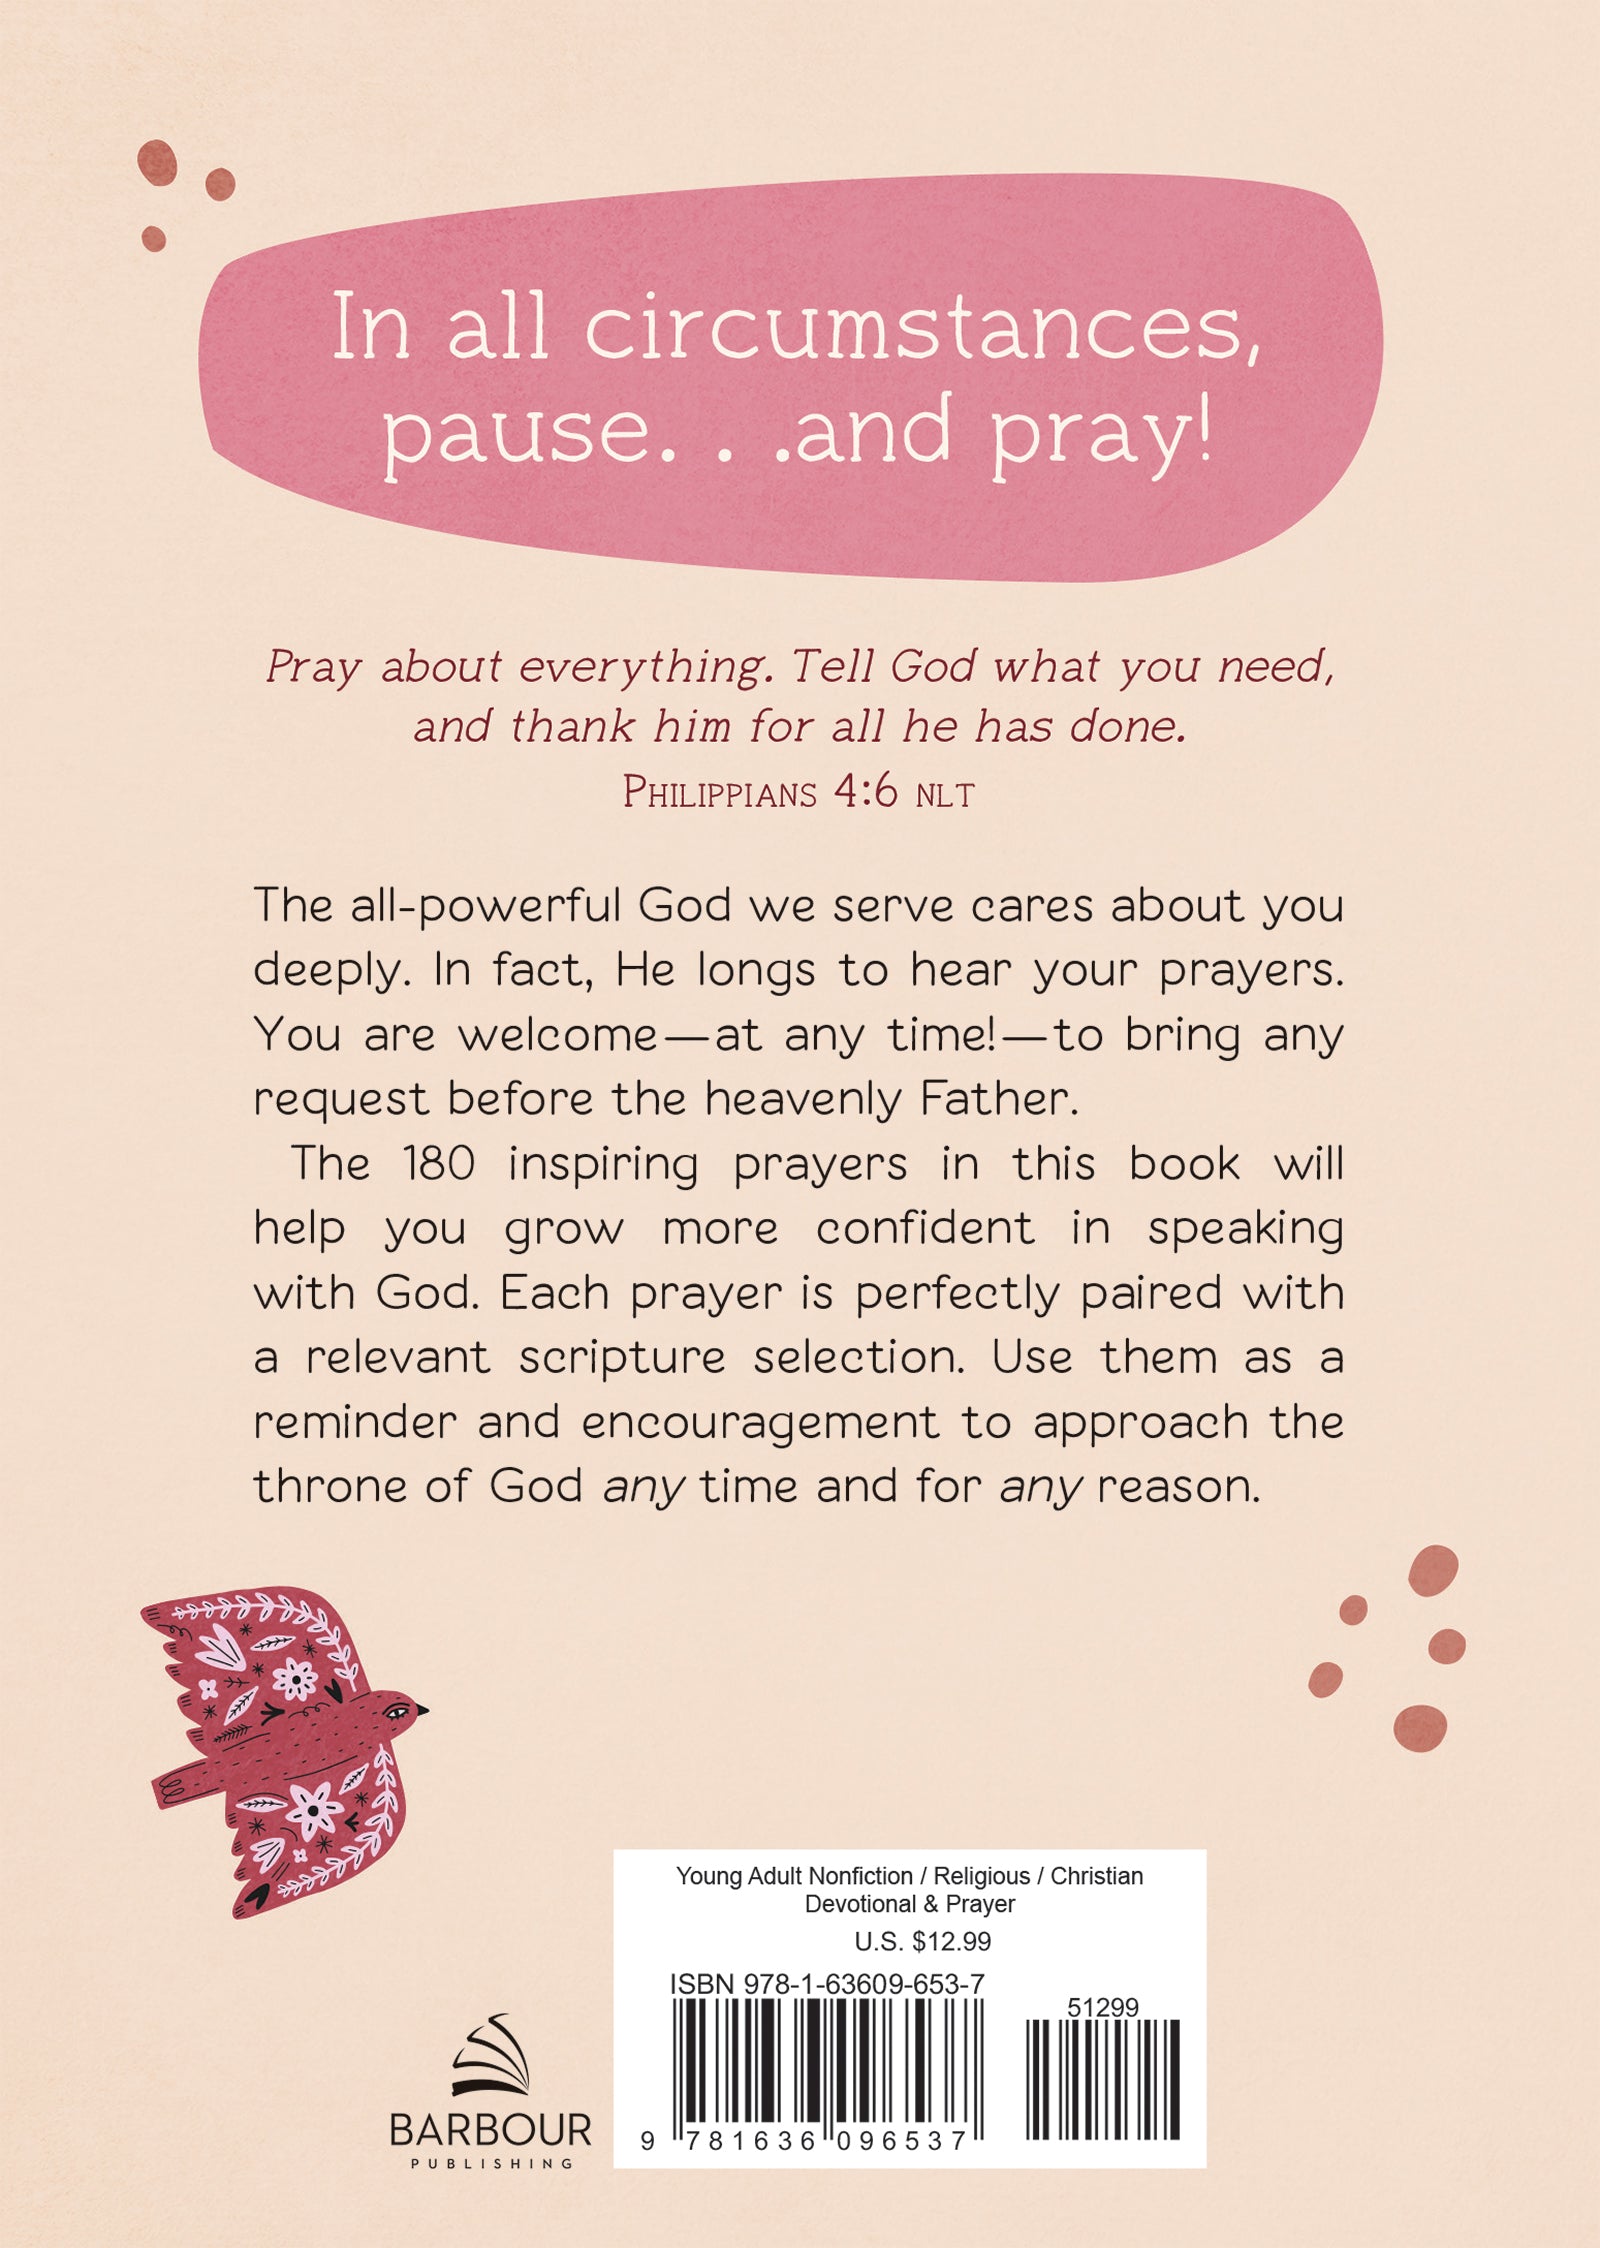 Pause and Pray (teen girls) - The Christian Gift Company